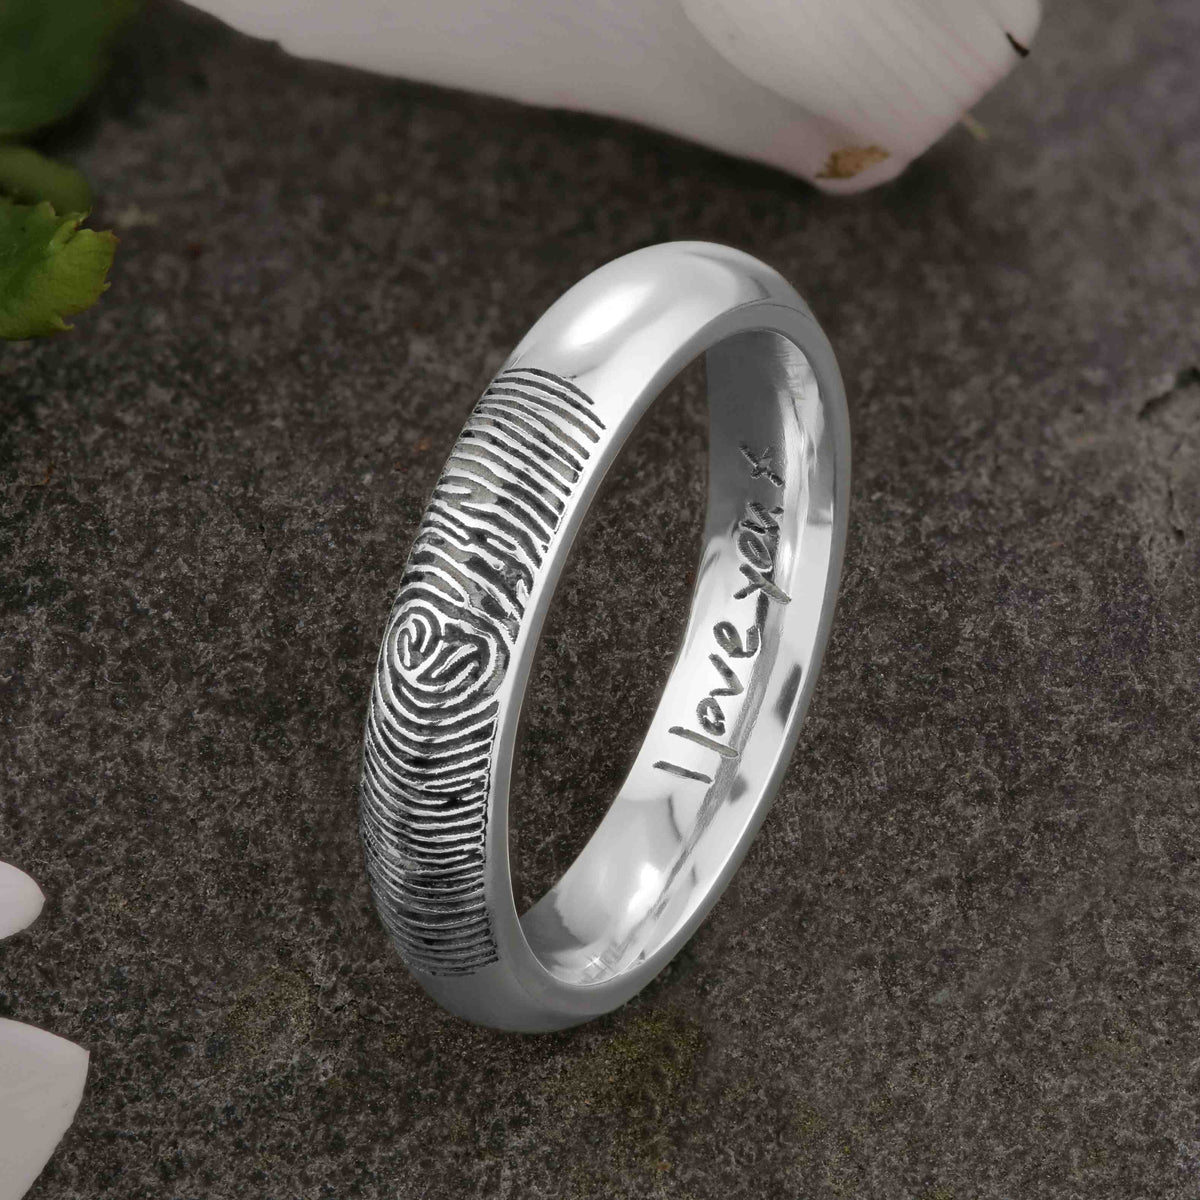 HAND ENGRAVED MENS WEDDING BANDS,18K YELLOW GOLD HAND ENGRAVED MENS WEDDING  RING | eBay